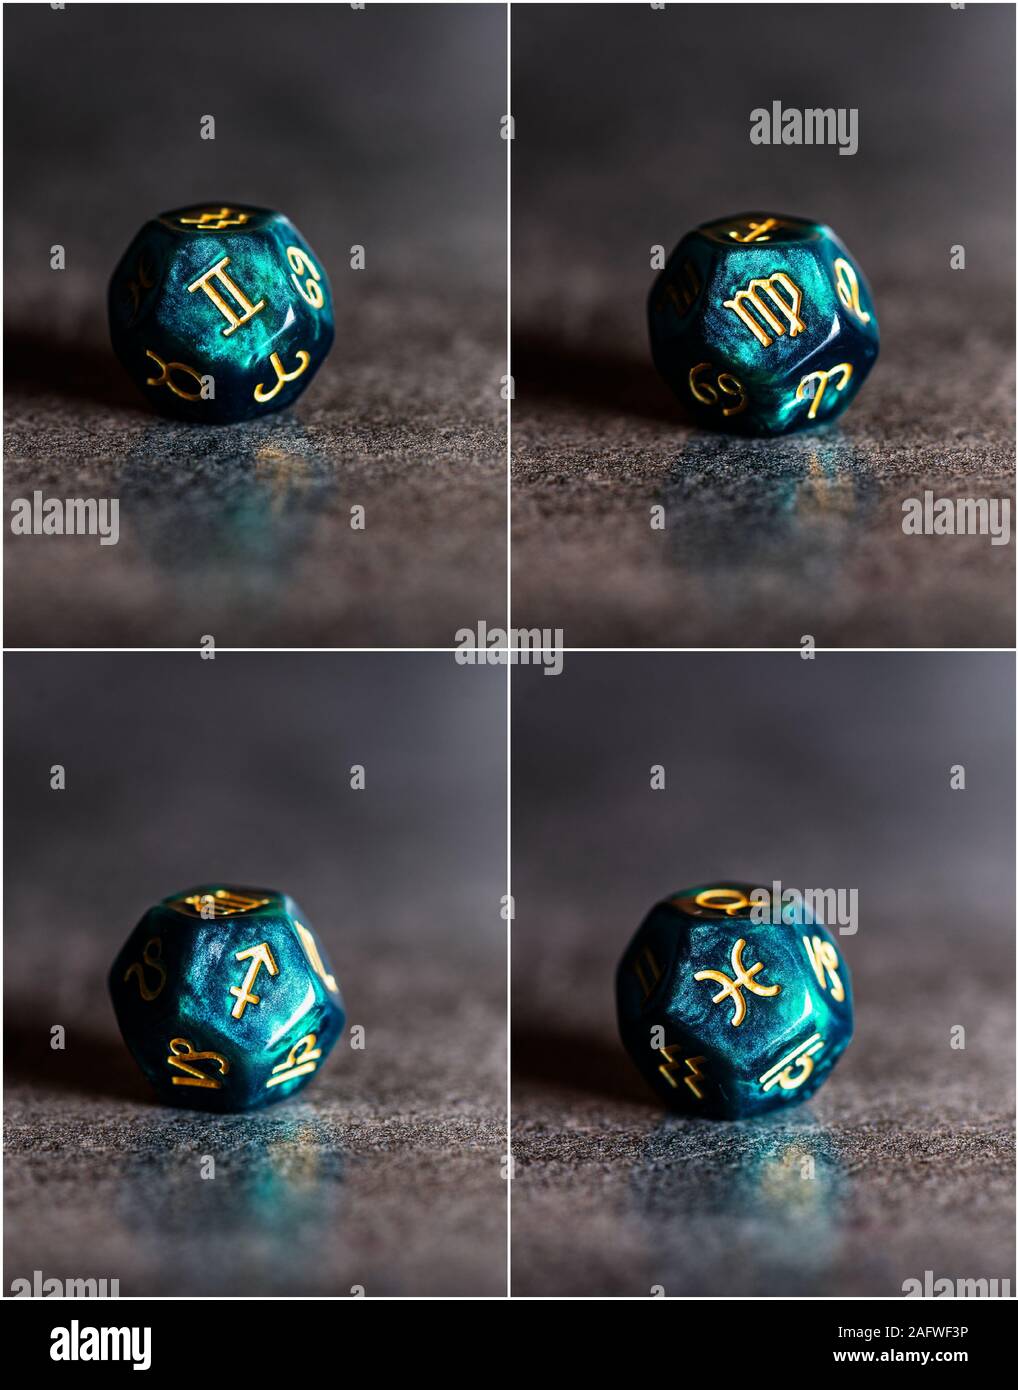 Collage of photos with Astrology Dice representing Mutable Modality of Astrological Signs. Gemini, Virgo, Sagittarius, Pisces Stock Photo